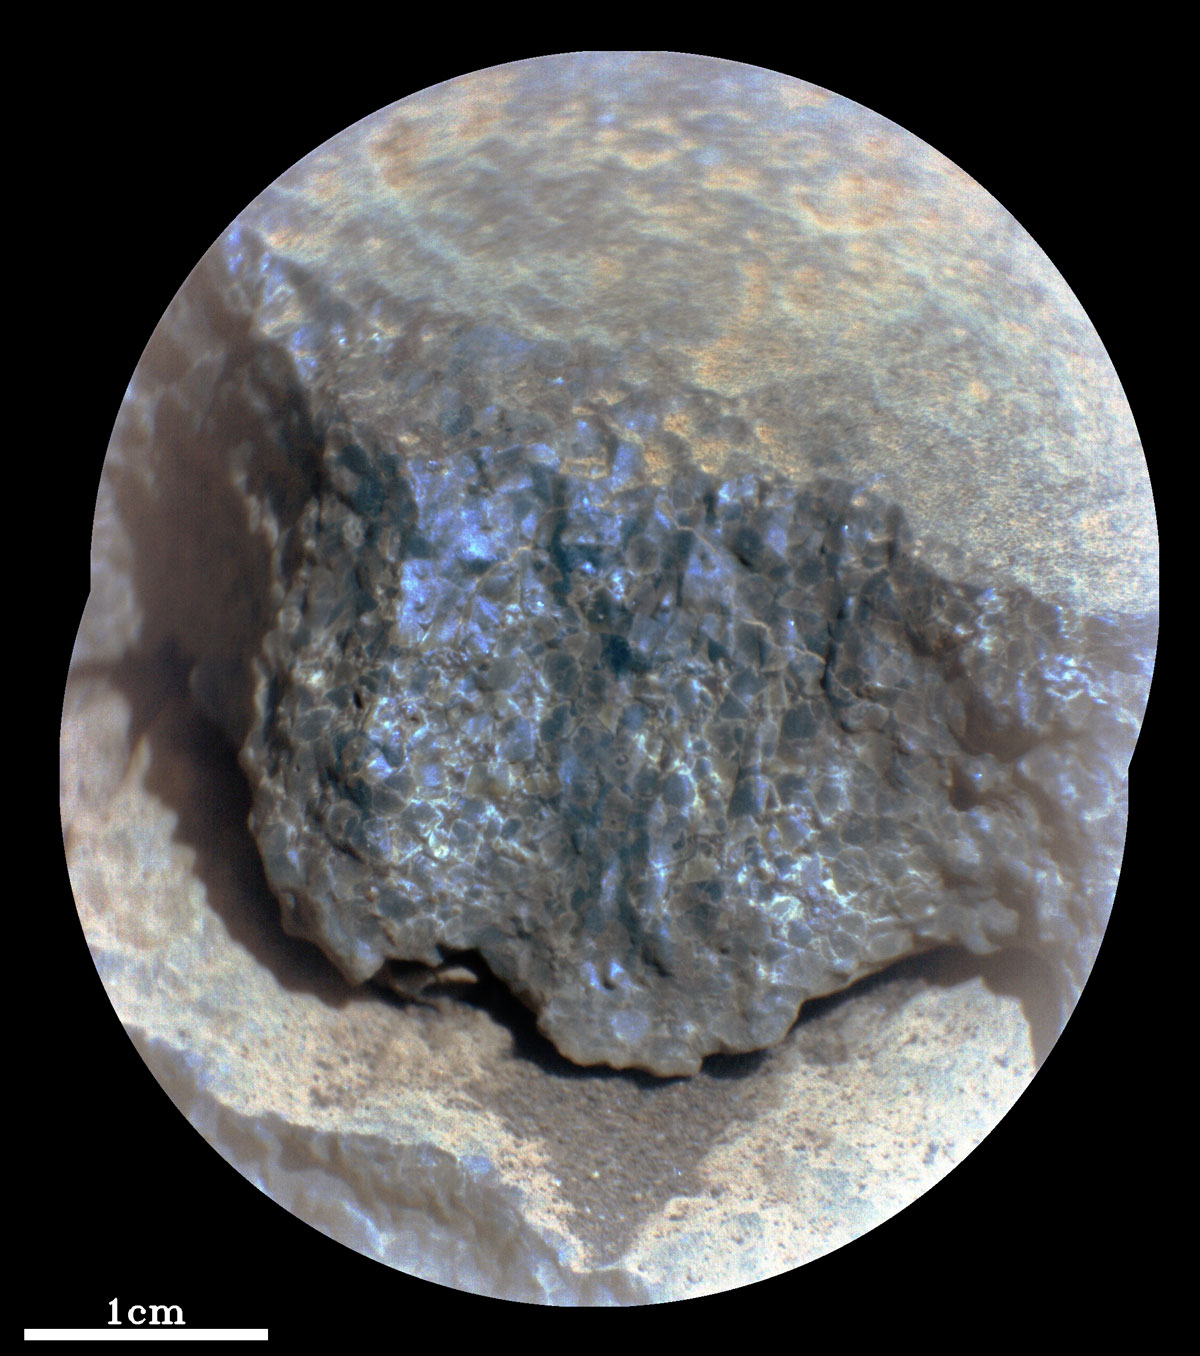 This enhanced-color close-up of a rock target called “Cine” was captured by the SuperCam instrument aboard NASA’s Perseverance Mars rover on September 17, 2021, the 206th Martian day, or sol, of rover’s mission.